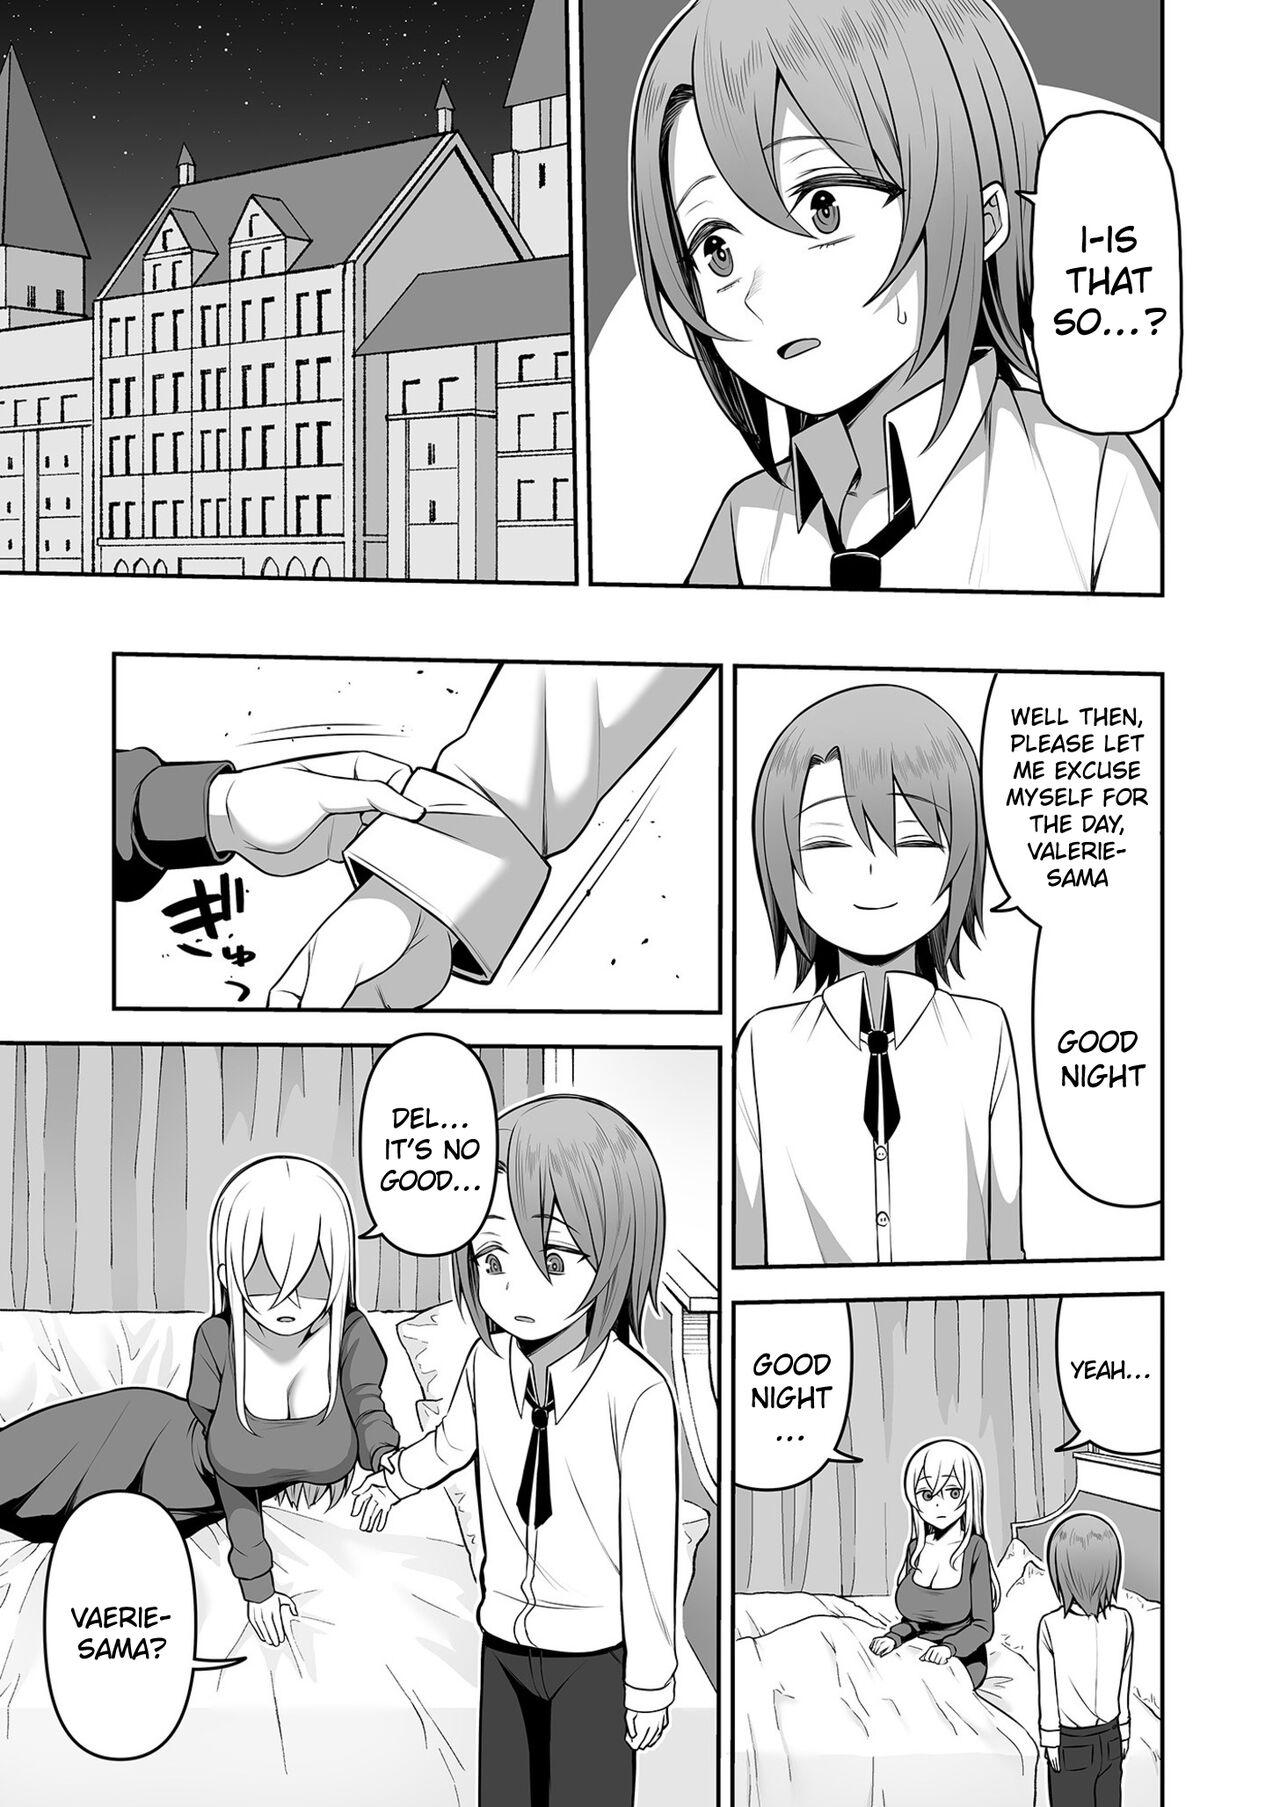 Gay Orgy [Kayumidome] Valerie Monogatari ~Oujo-sama wa Yaritai Houdai!?~ Ch1/ The Story of Valerie ~The Queen Gets To Fuck As Much As She Wants!~ Ch.1 [English] {Doujins.com} Stepsister - Page 7